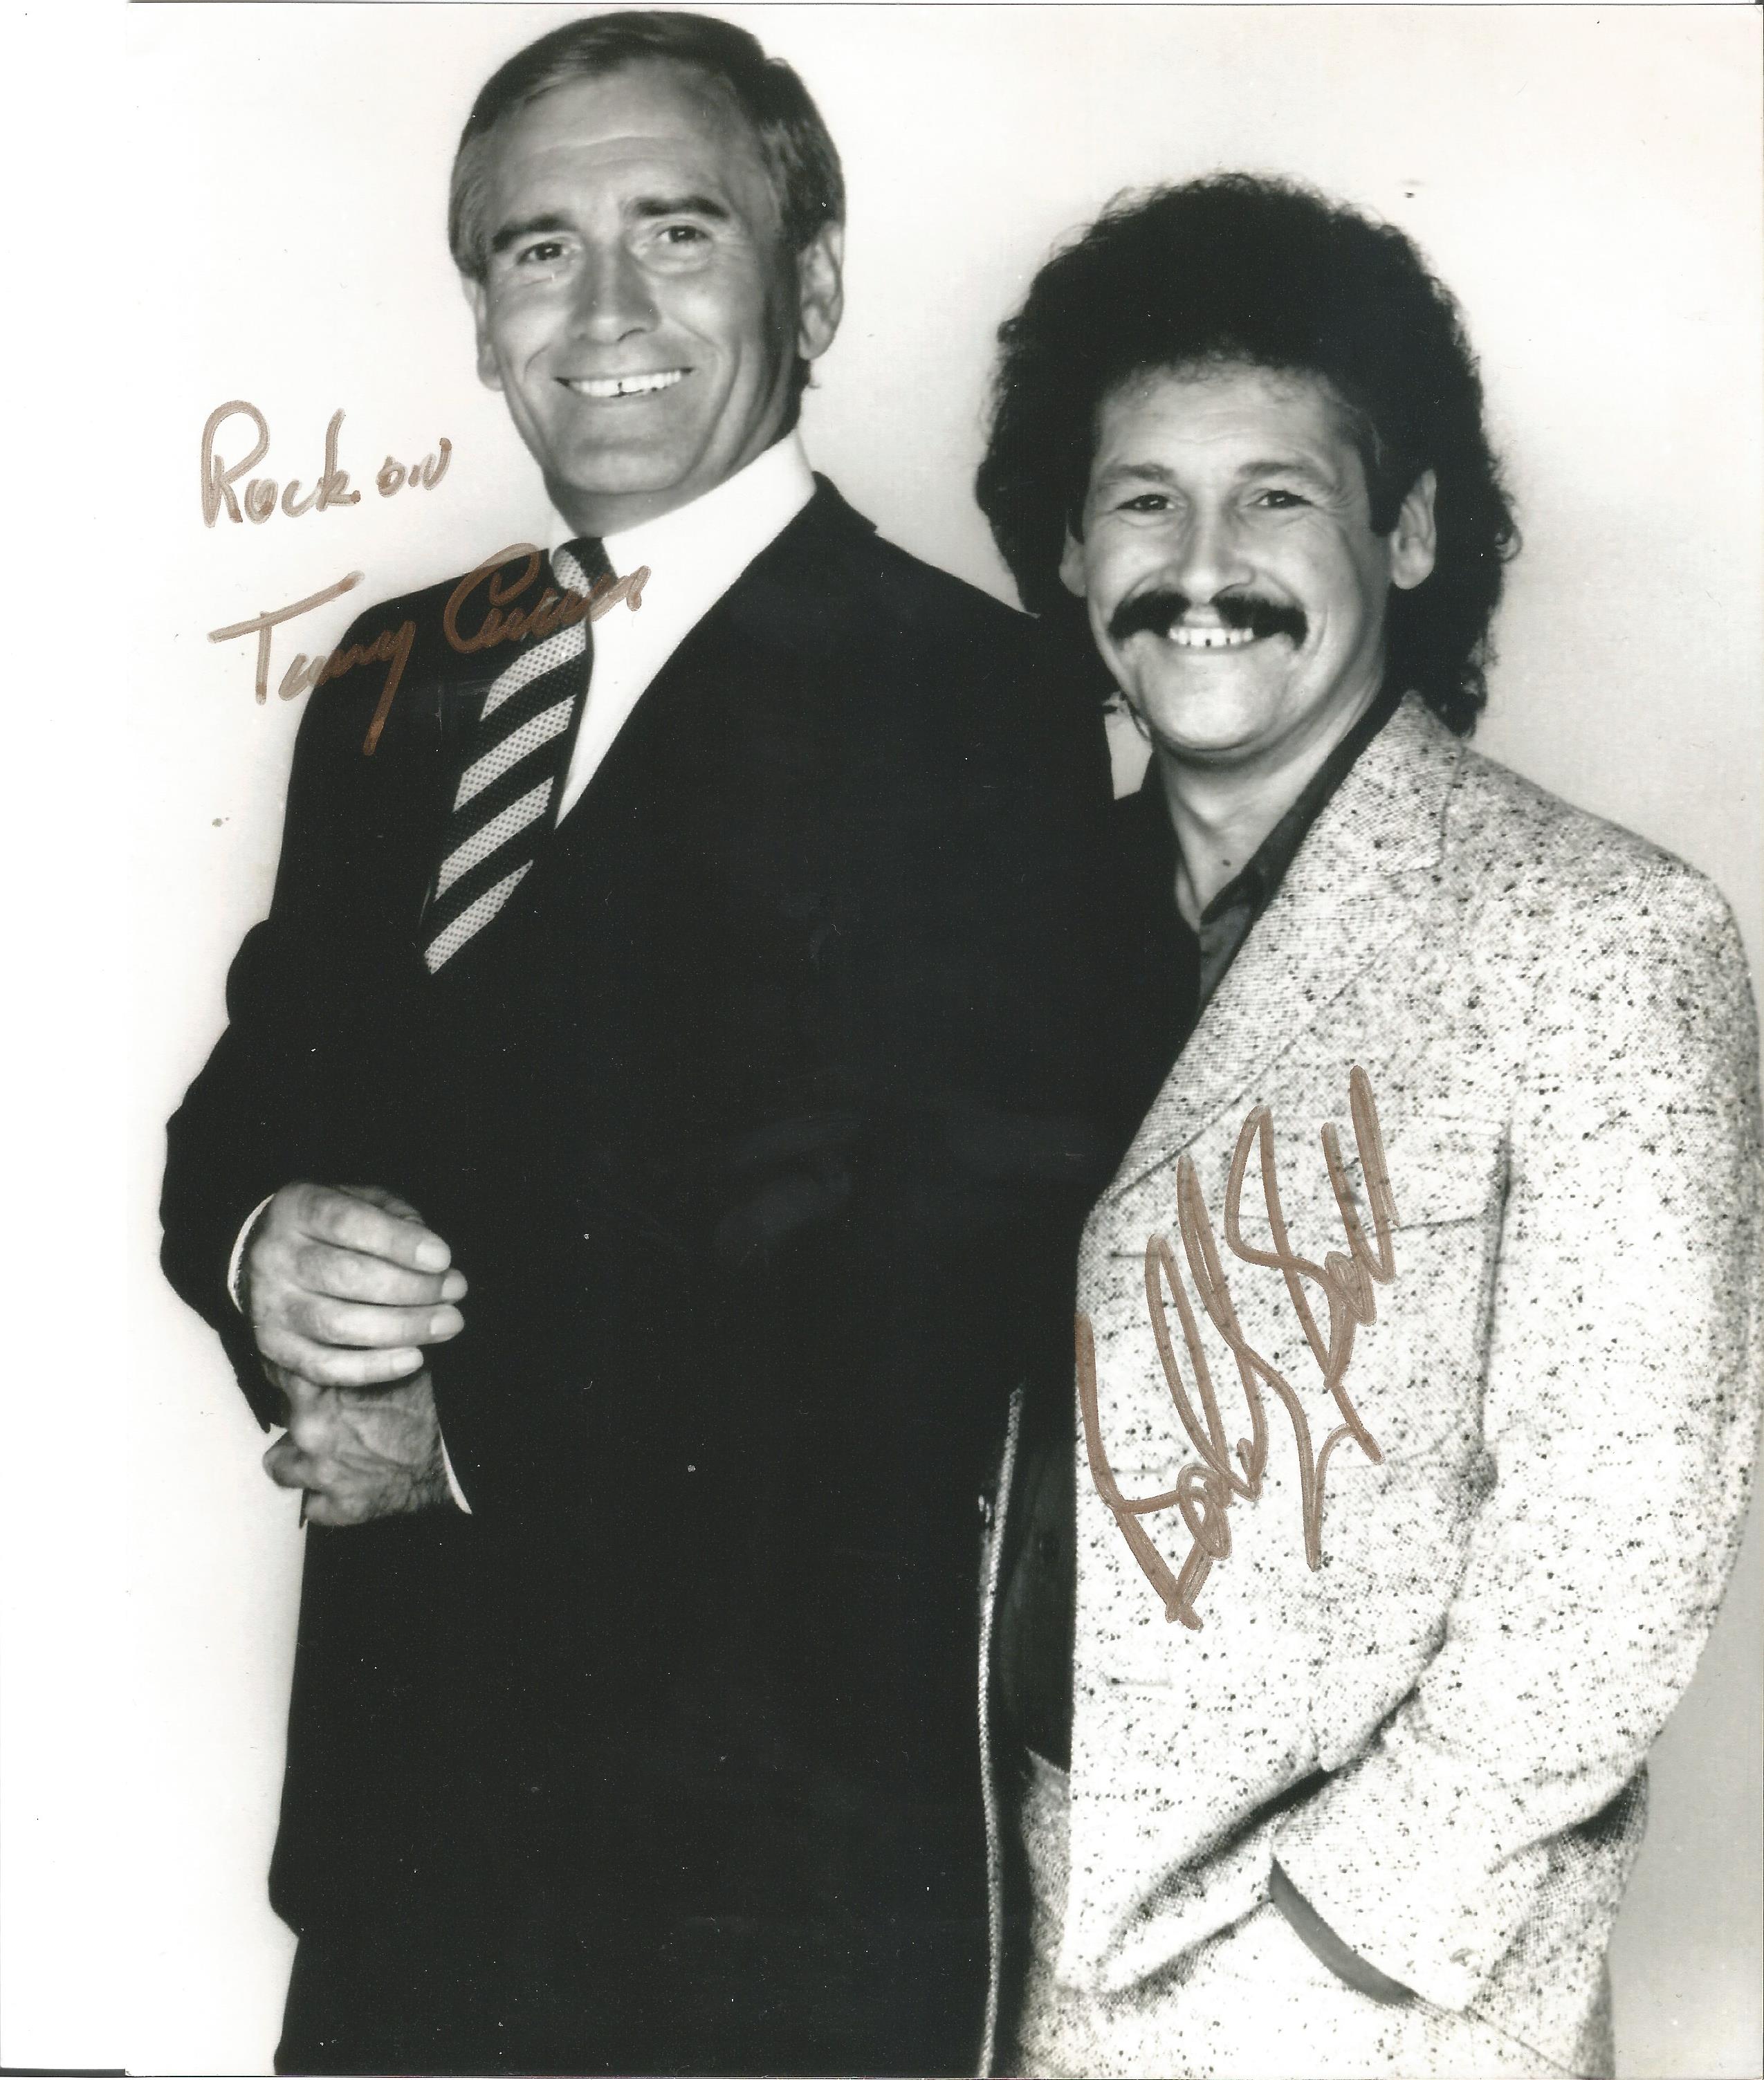 Tommy Cannon and Bobby Ball double signed 10 x 8 b/w portrait photo. They were known collectively as